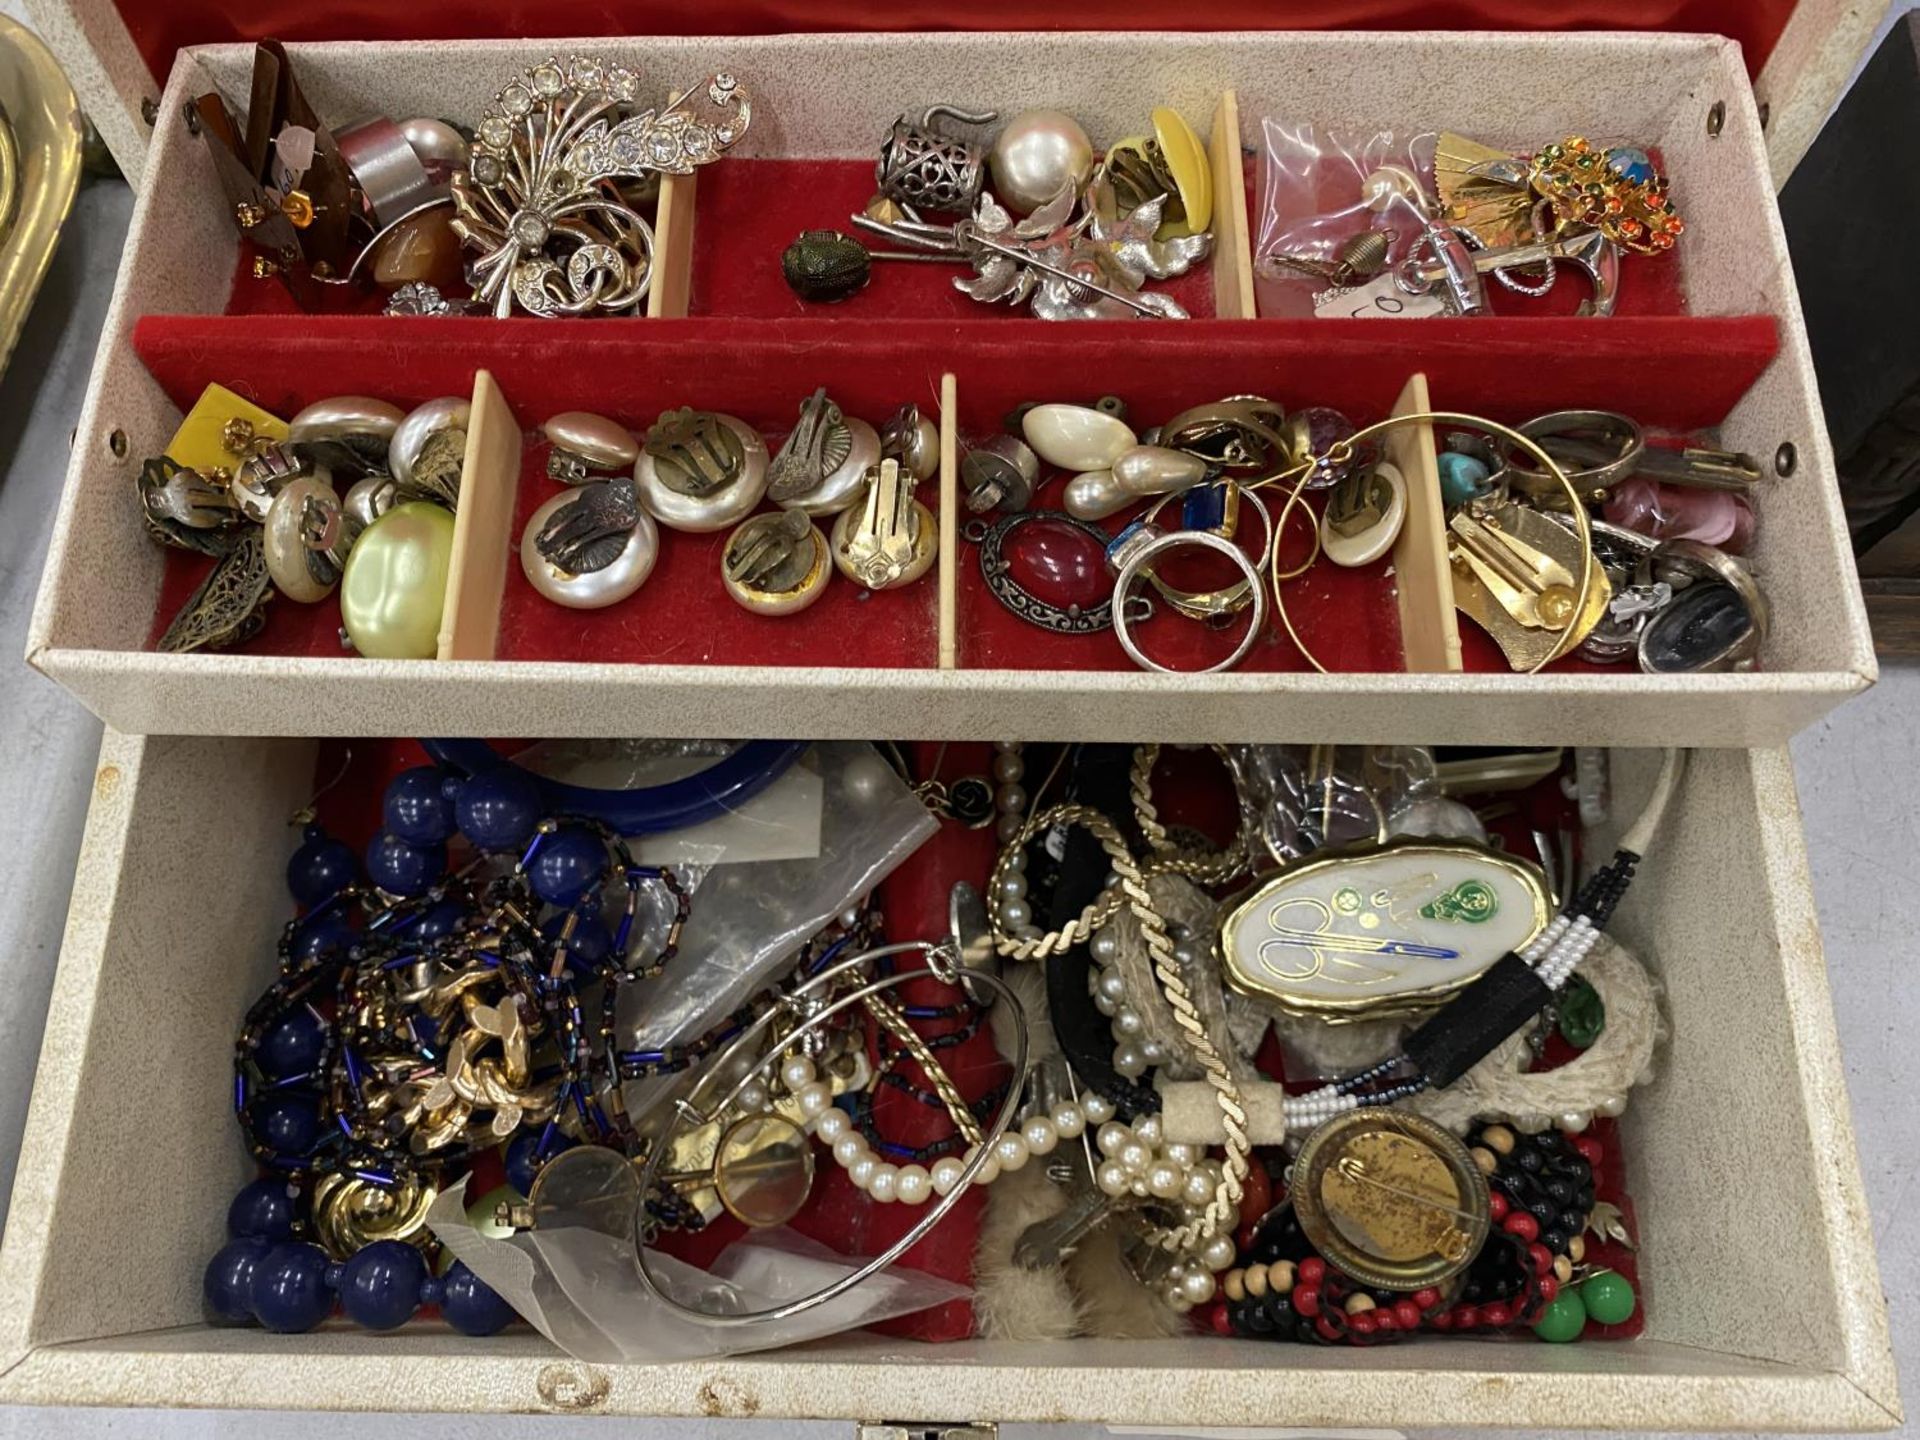 A QUANTITY OF COSTUME JEWELLERY TO INCLUDE BROOCHES, EARRINGS, NECKLACES, ETC - Image 2 of 3